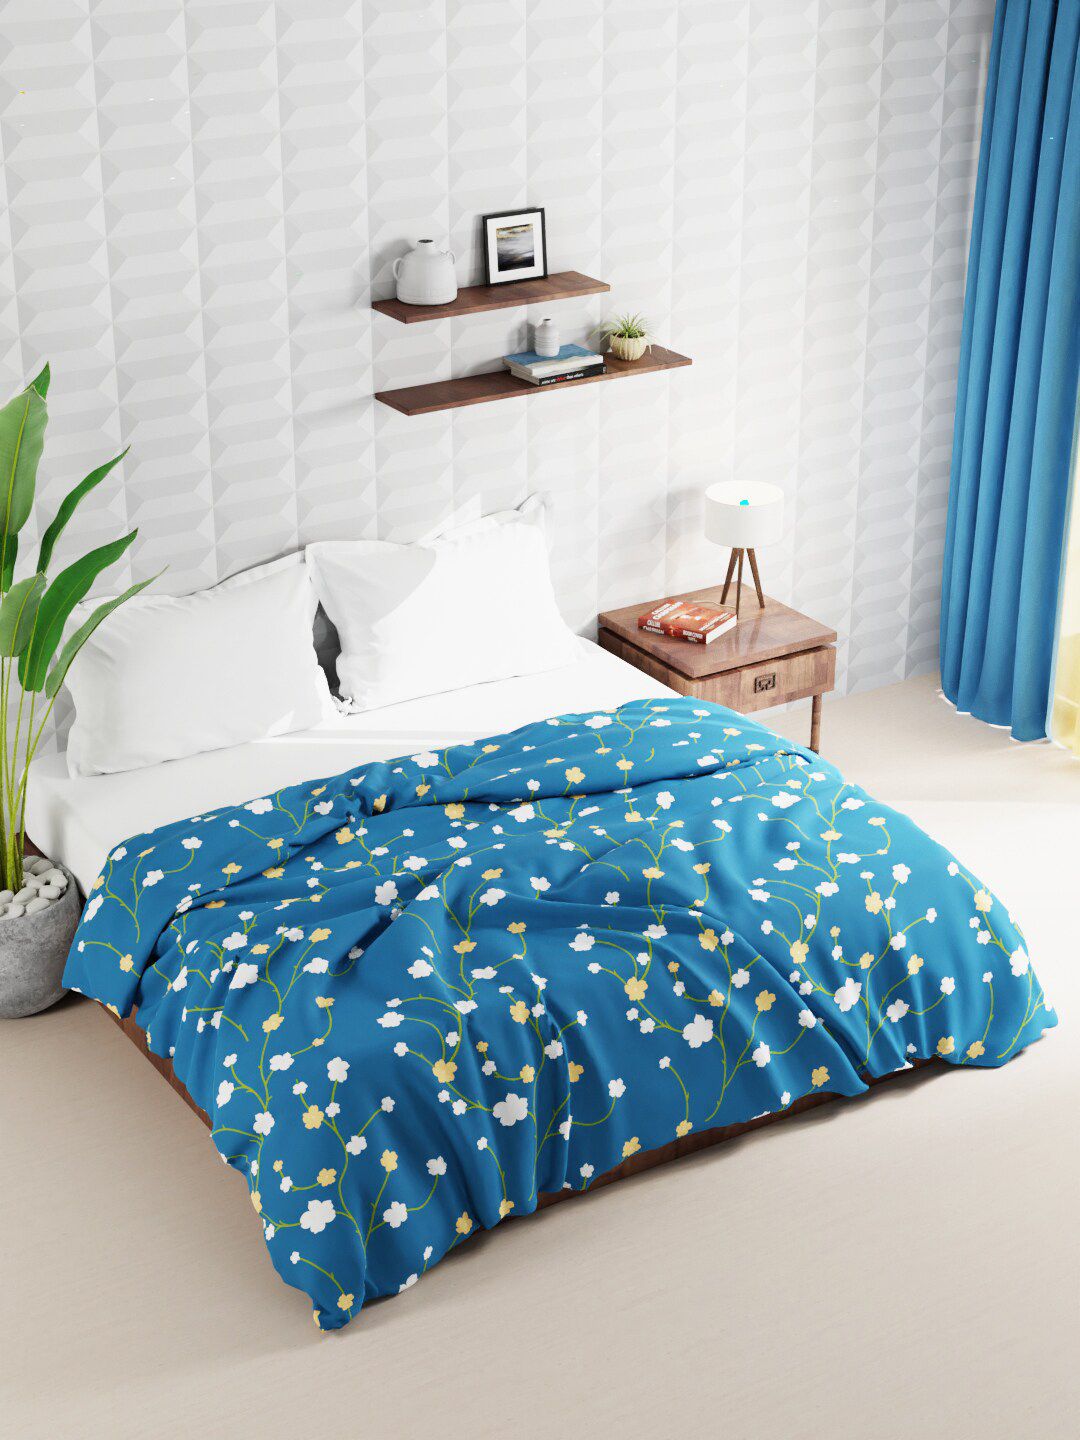 BIANCA Teal & White Floral AC Room Double Bed Comforter Price in India